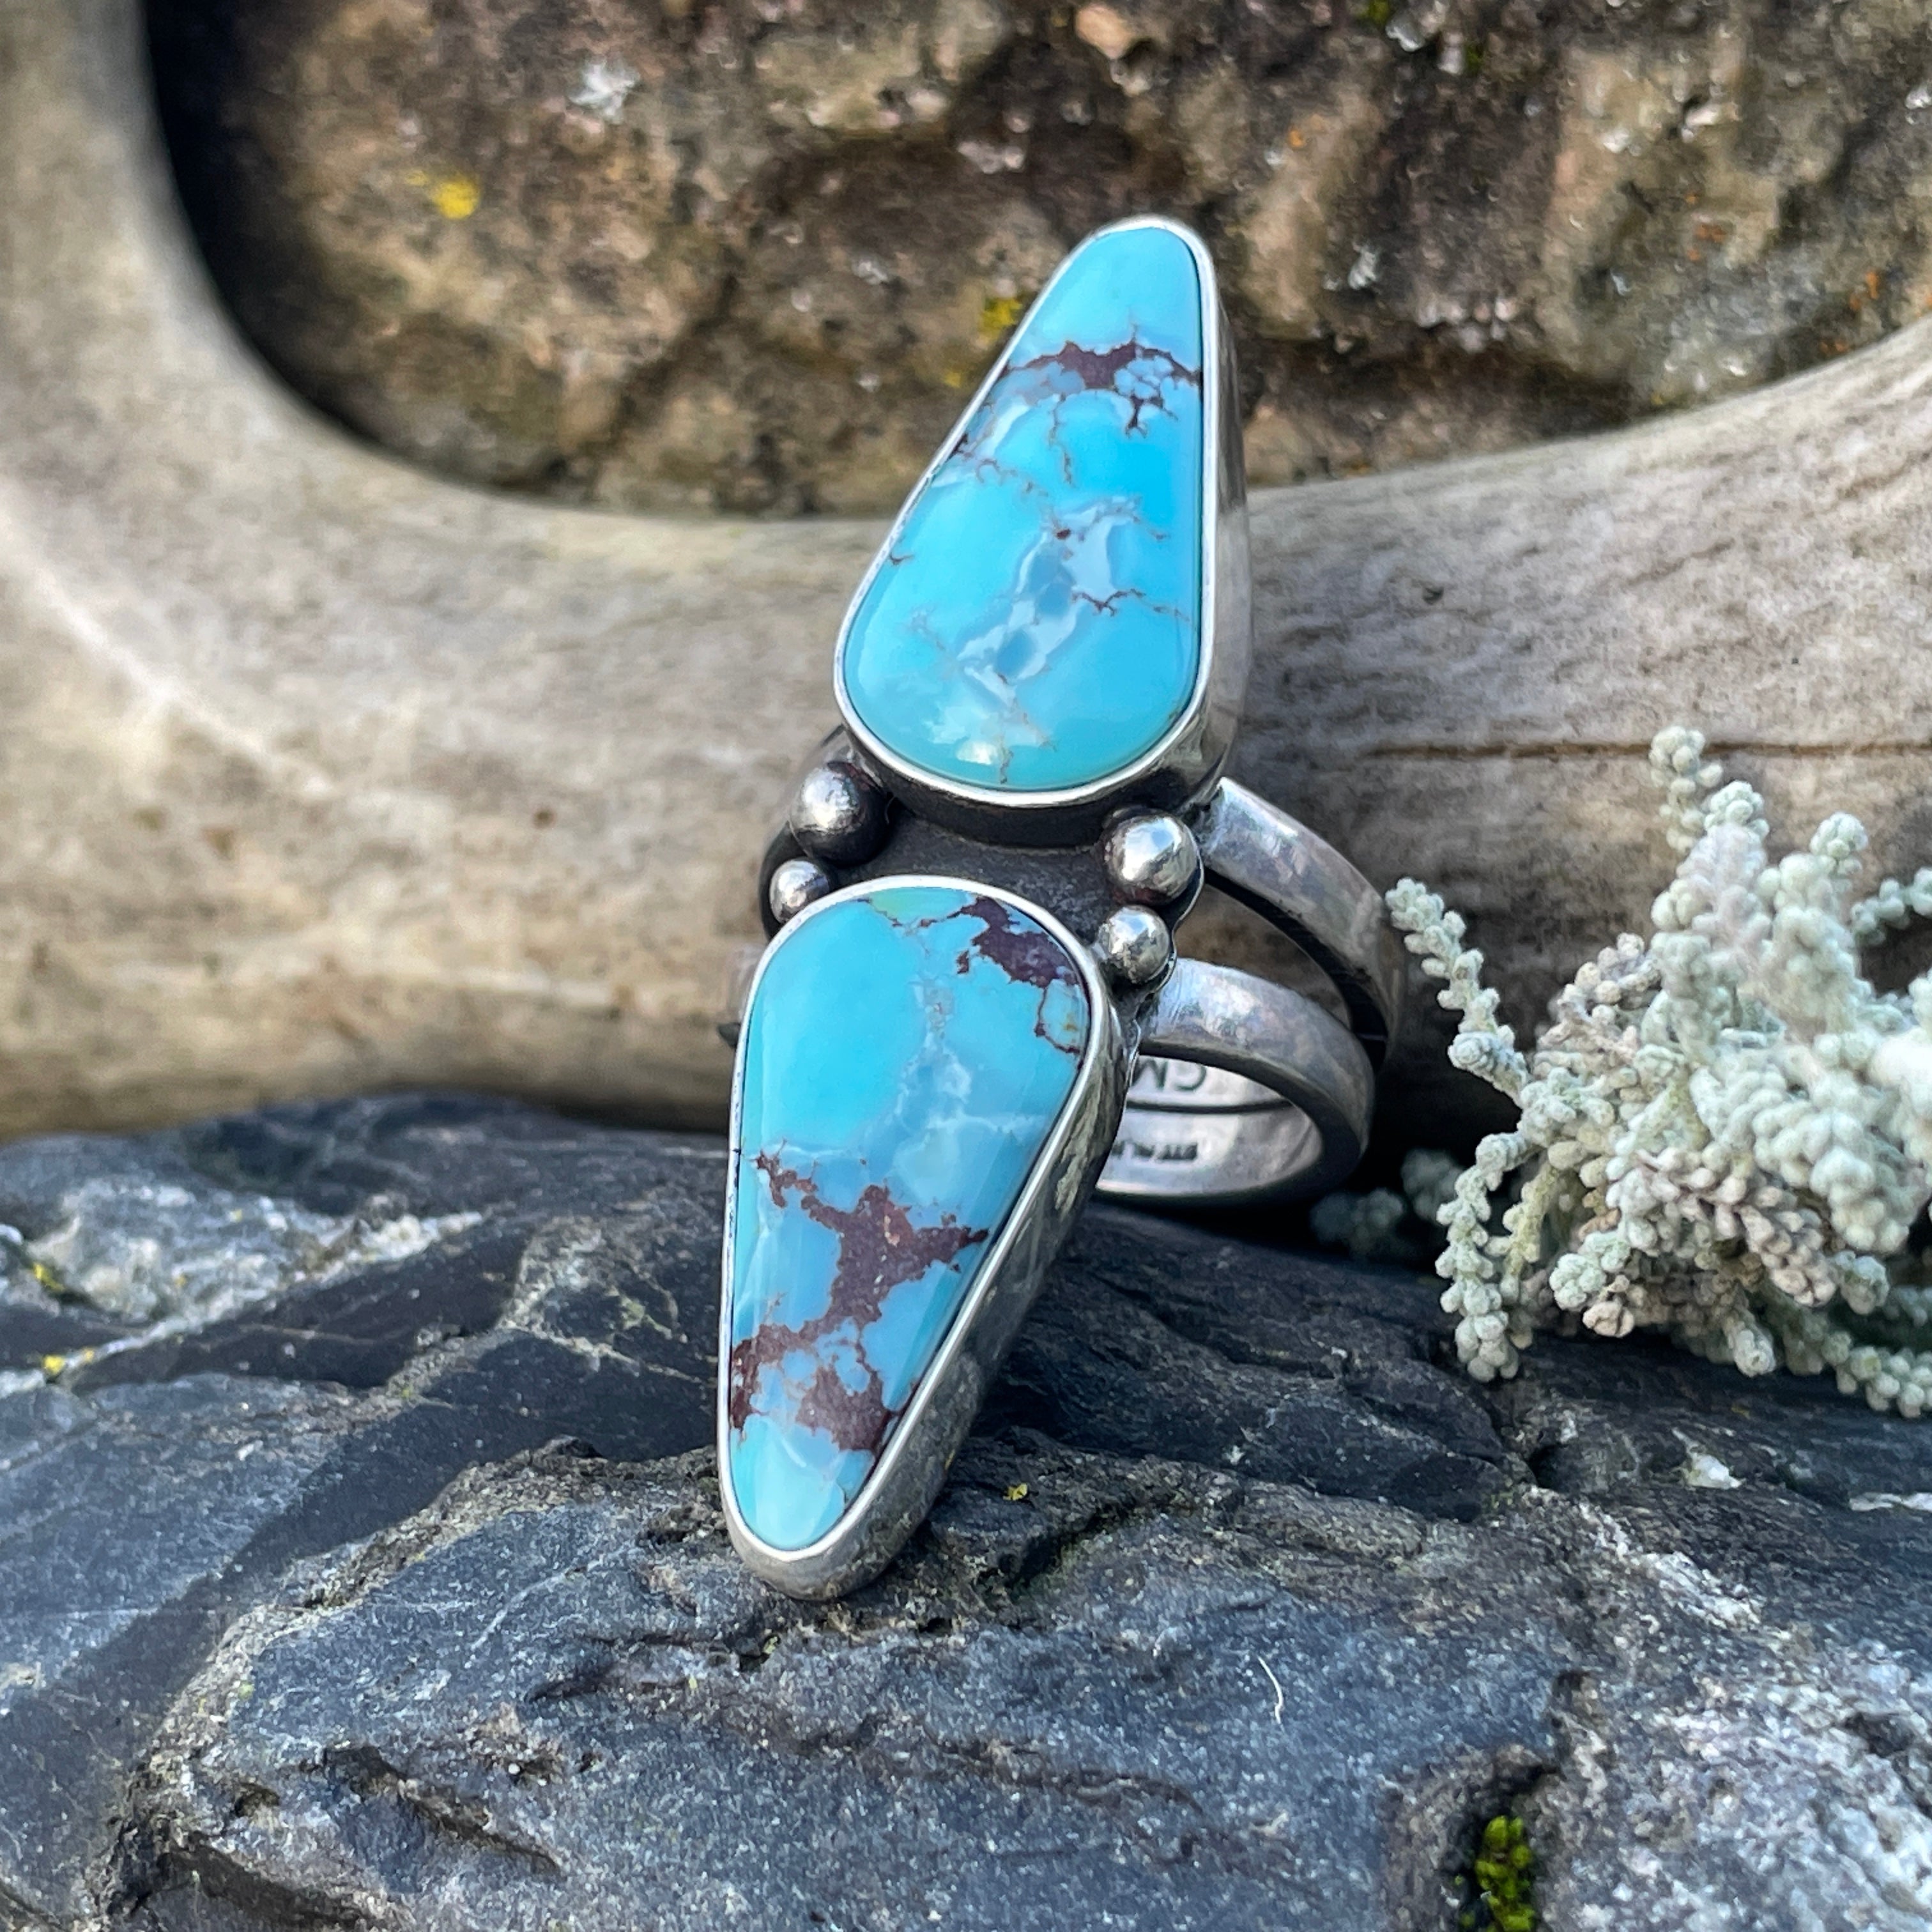 Golden Hills Turquoise Ring ~ Size 8